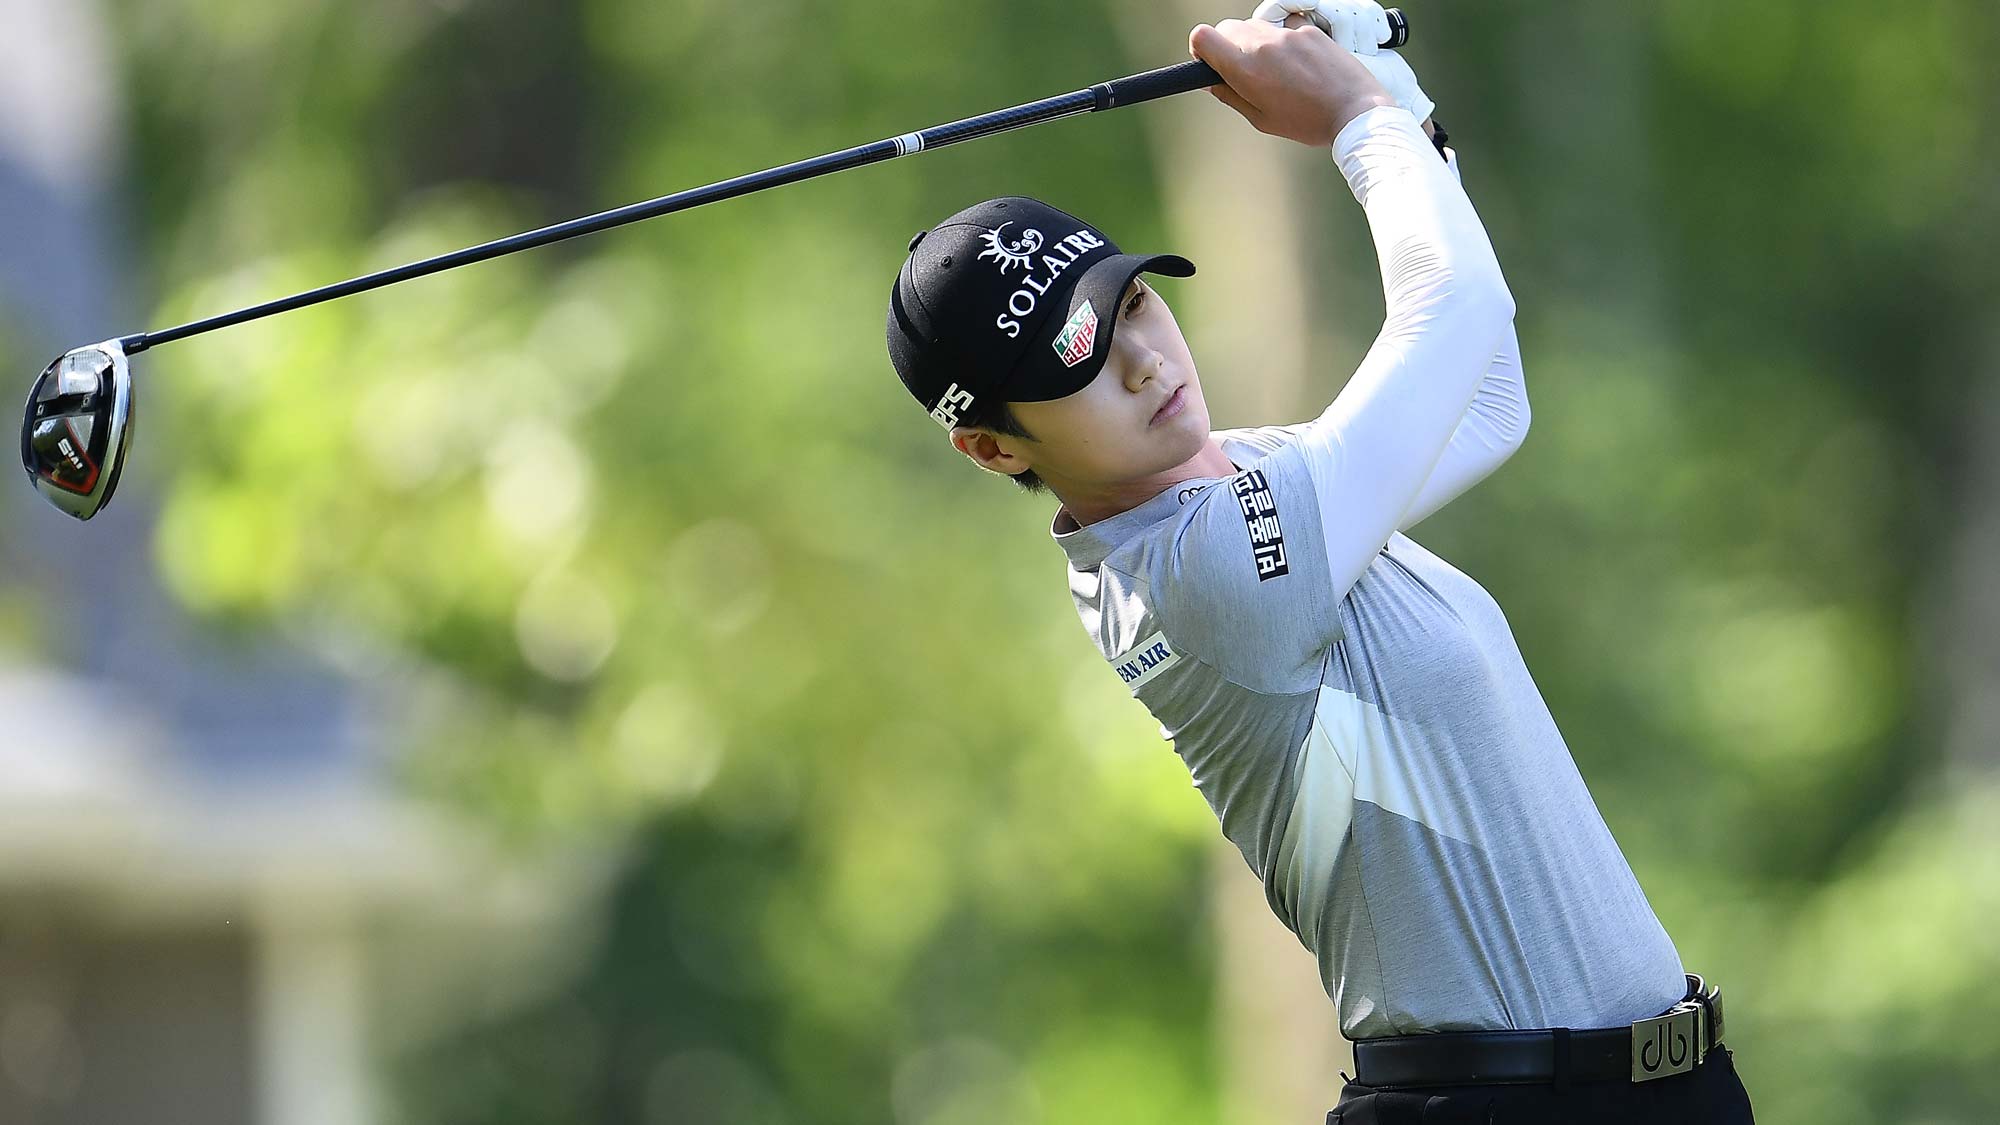 Sung Hyun Park of the Republic of Korea hits her tee shot on the third hole during the second round of the Thornberry Creek LPGA Classi